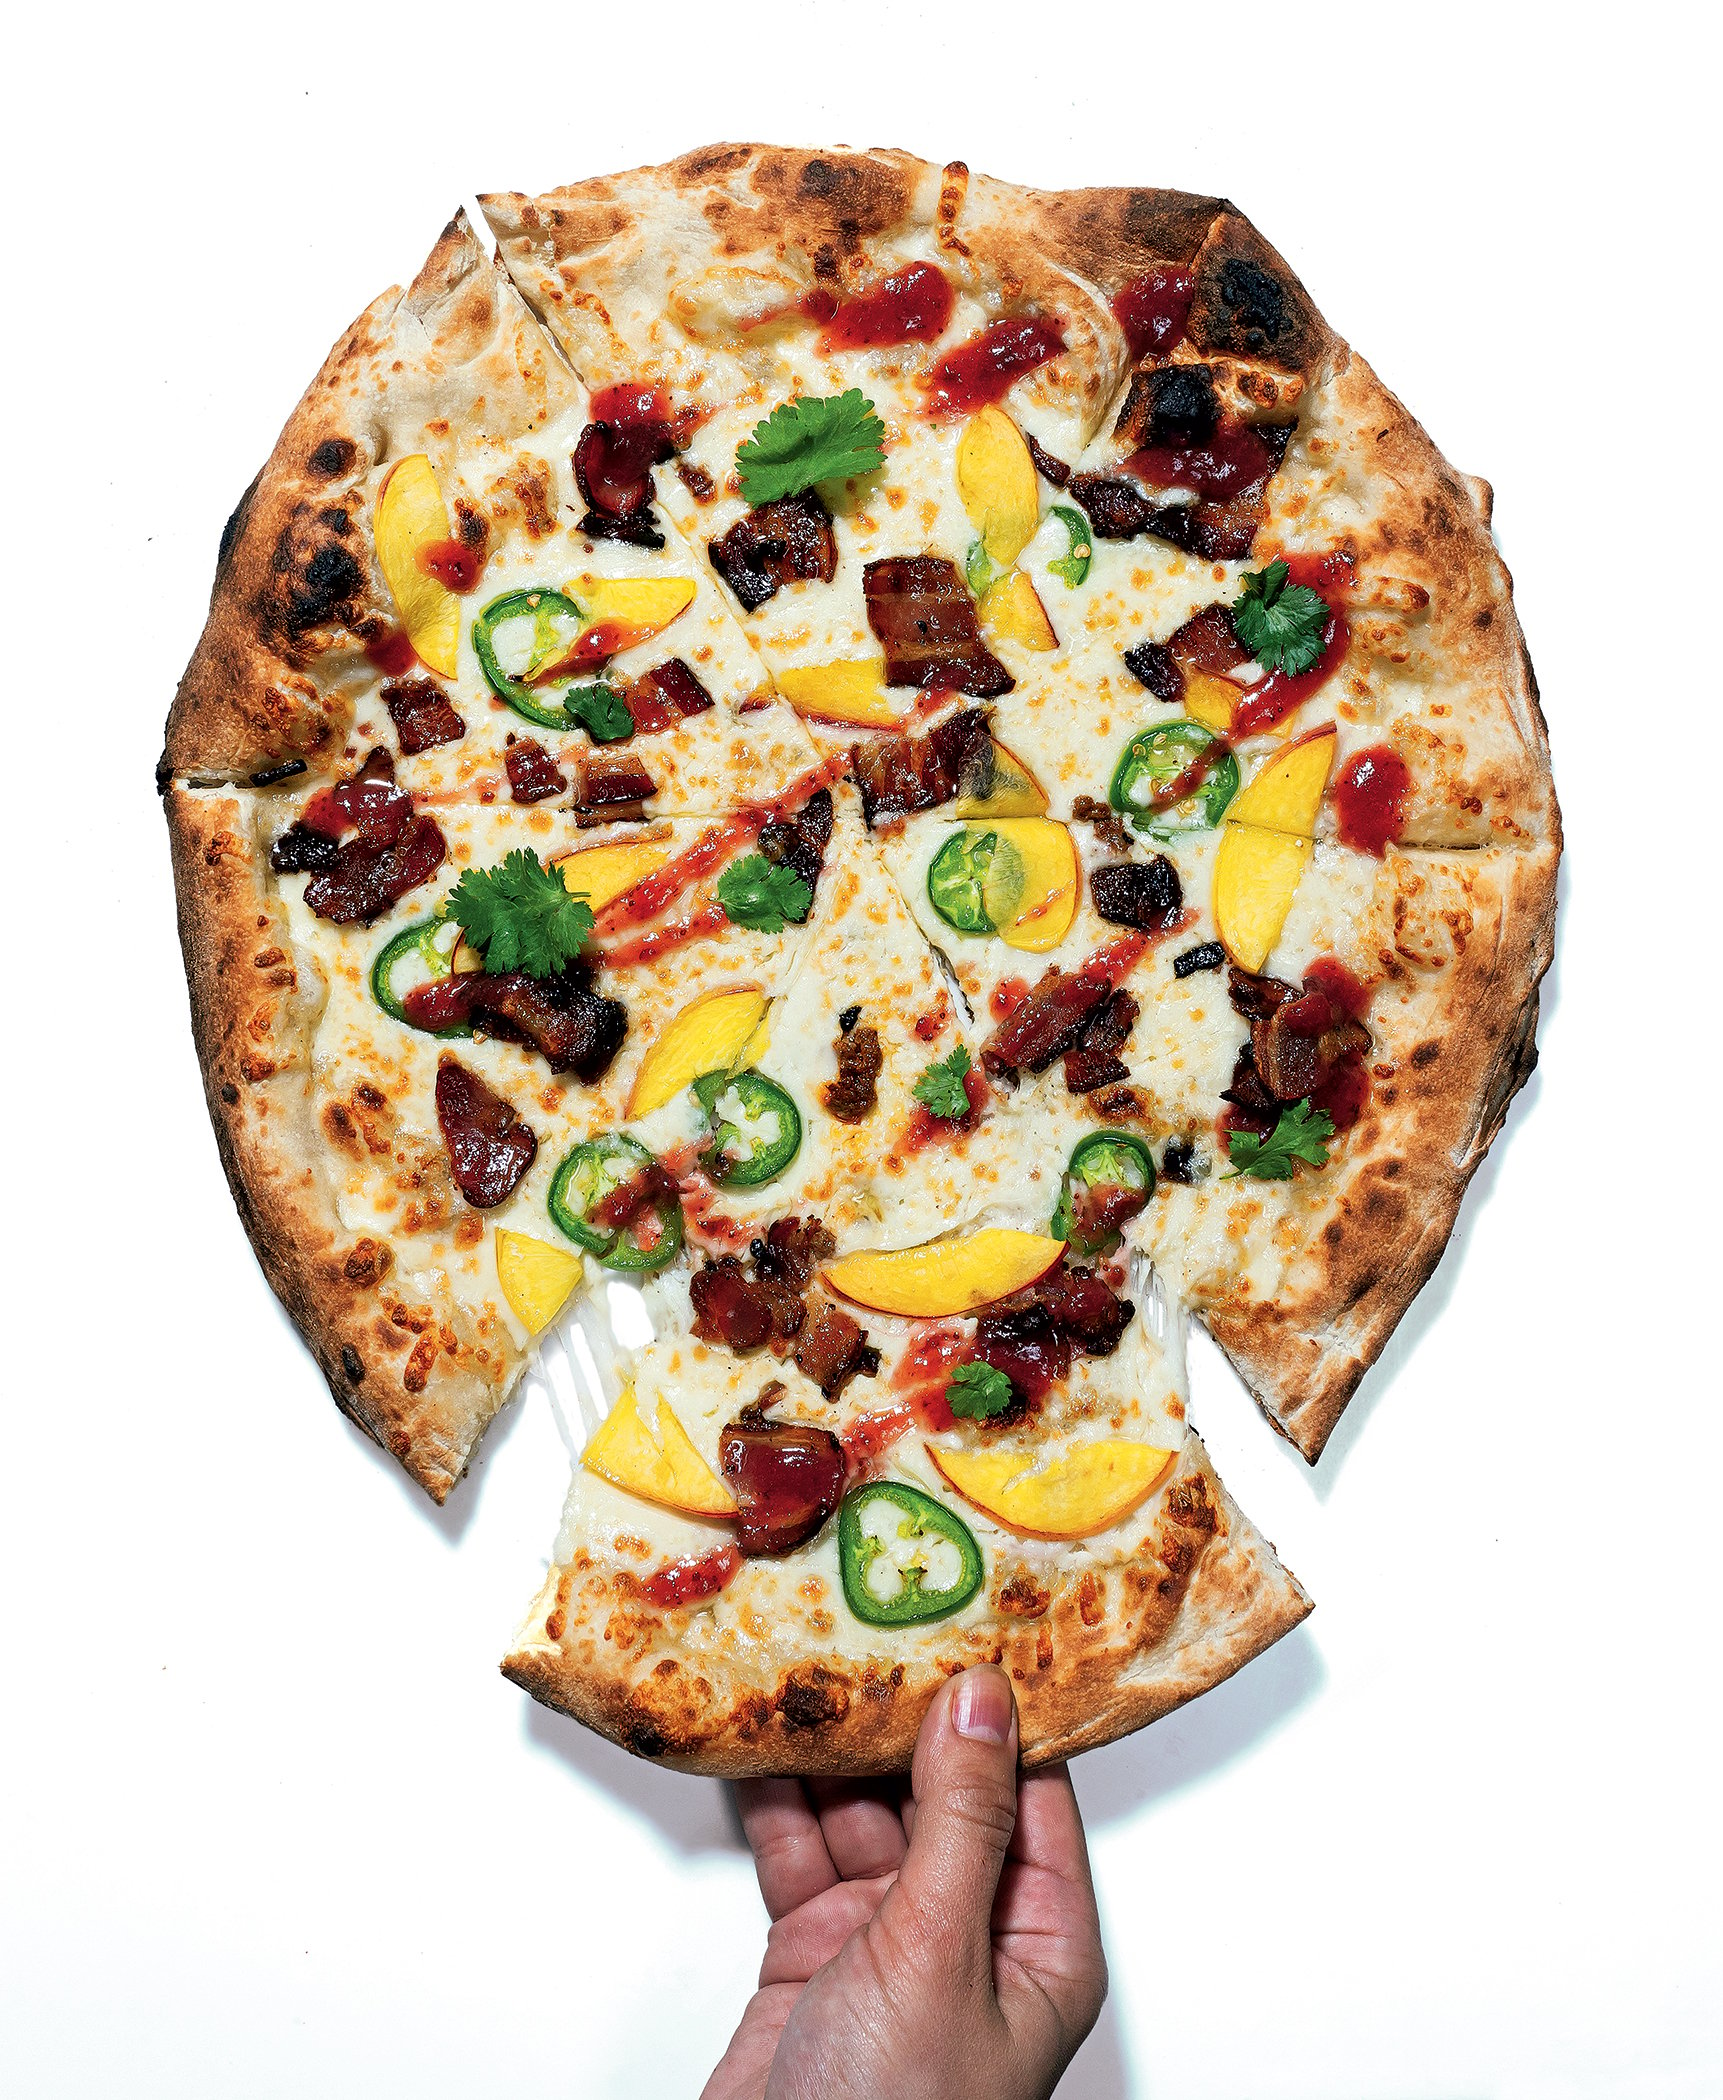 Timber Pizza Co.'s nectarine and bacon pie. Photograph by Scott Suchman.